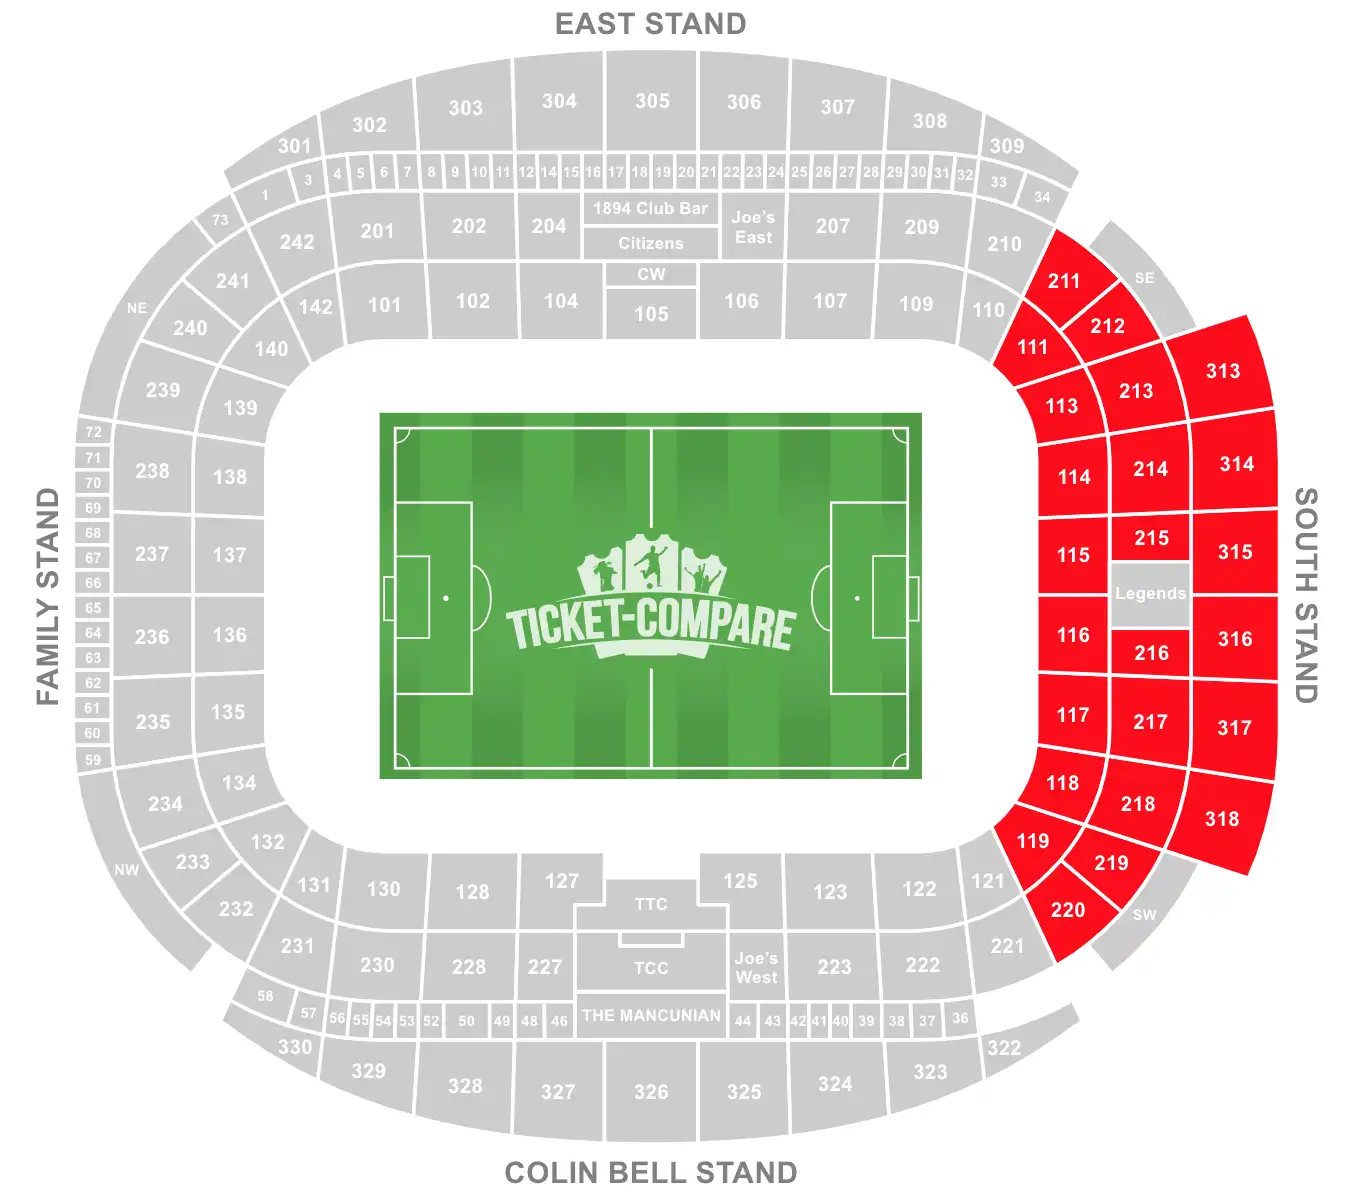 Etihad Stadium Seating Plan South Stand highligted